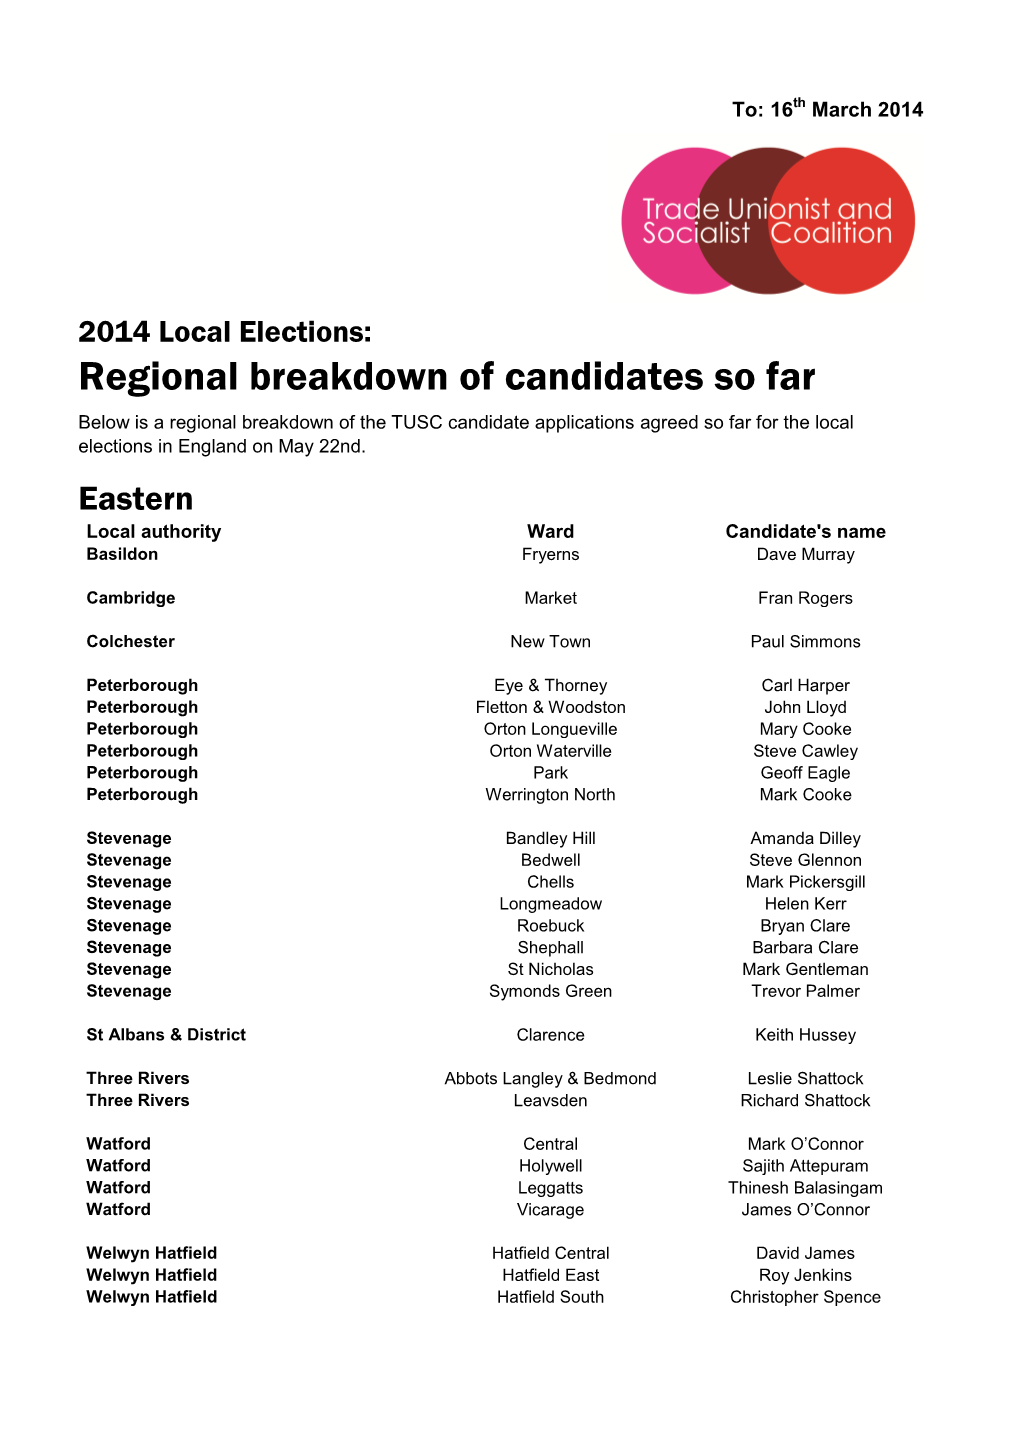 Regional Breakdown of Candidates So Far Below Is a Regional Breakdown of the TUSC Candidate Applications Agreed So Far for the Local Elections in England on May 22Nd